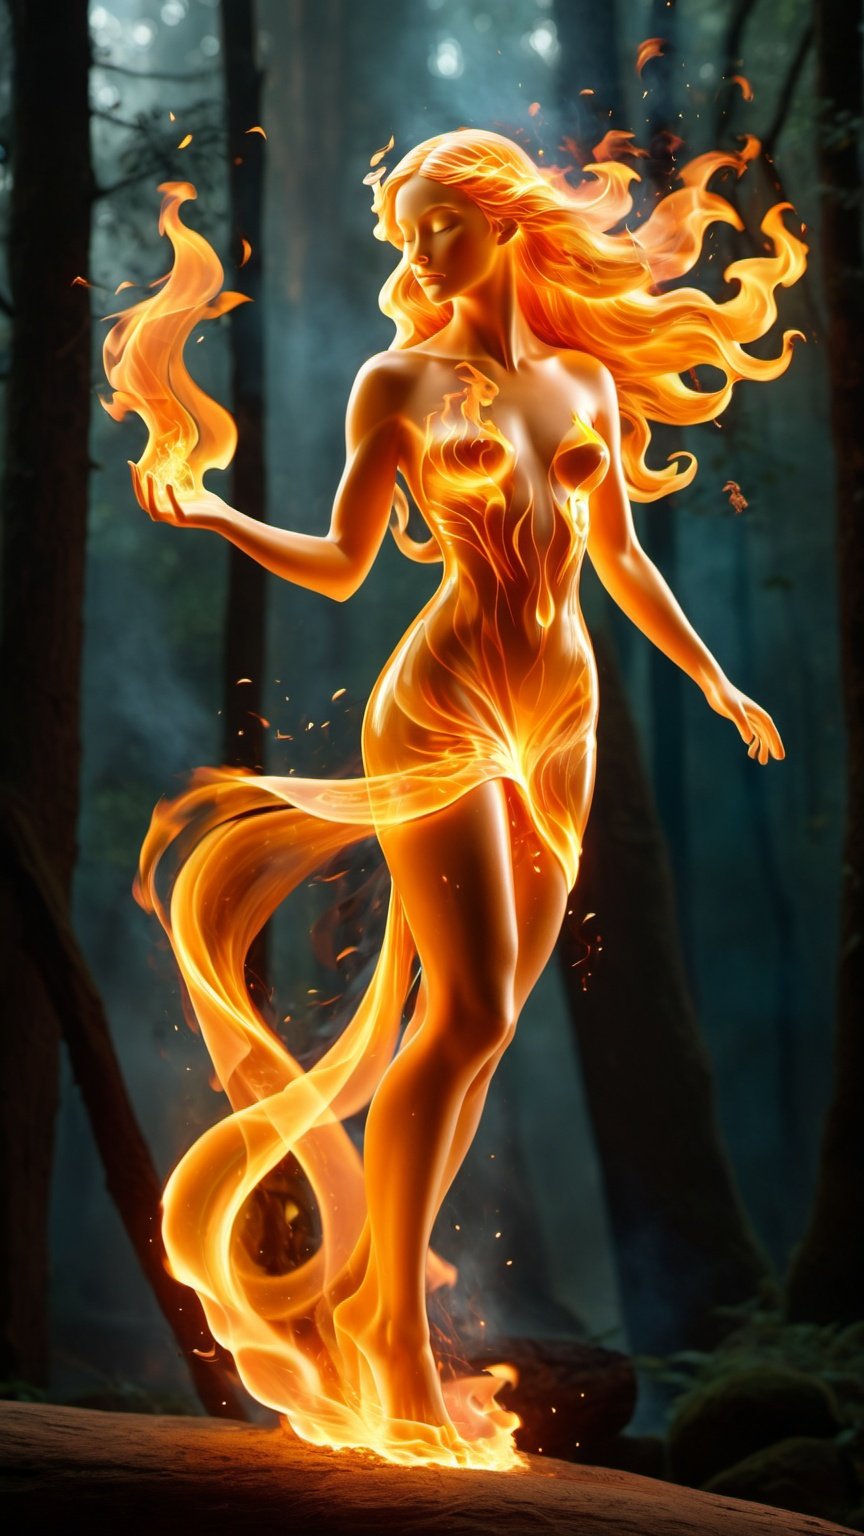  A goddess's avatar, with flowing locks resembling burning flames, exudes a fantastical and enchanting, fire element,An angel